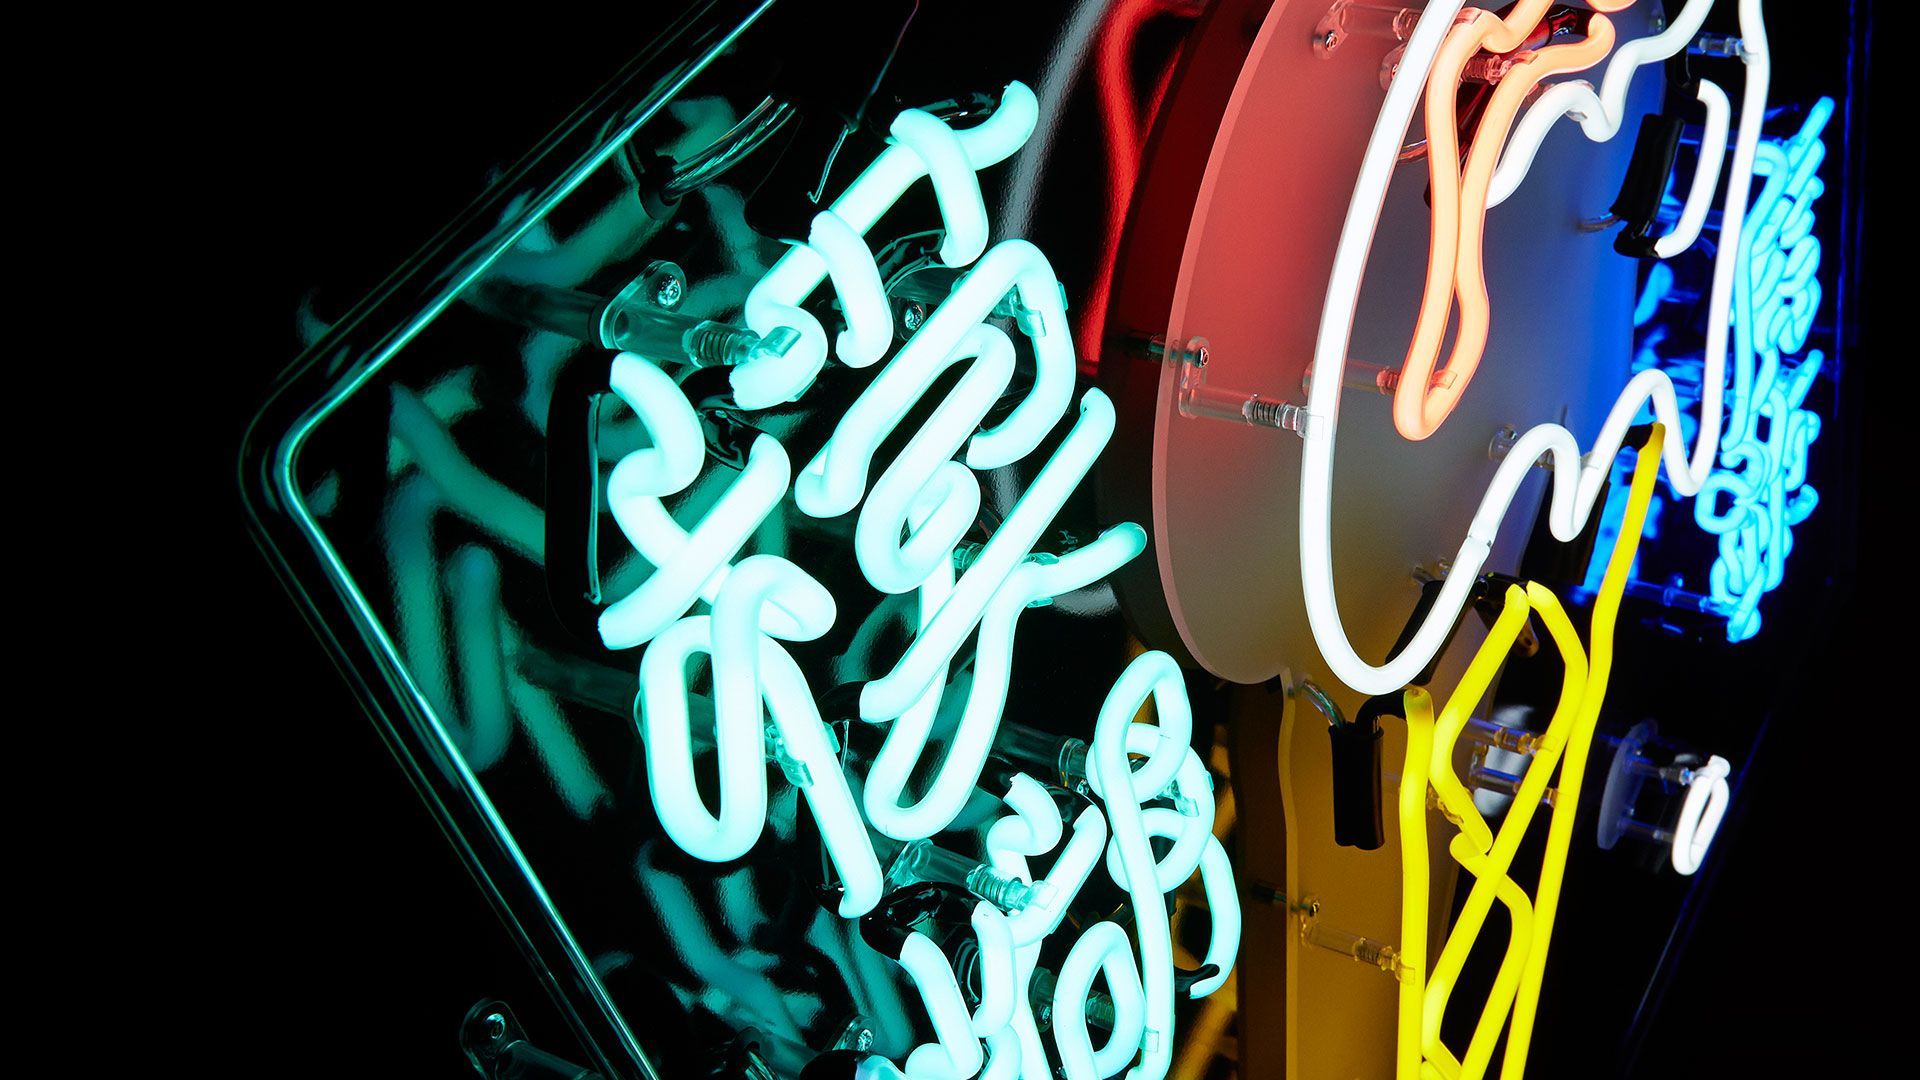 Art Vinyl's record sleeves of the year. Neon signs, Record